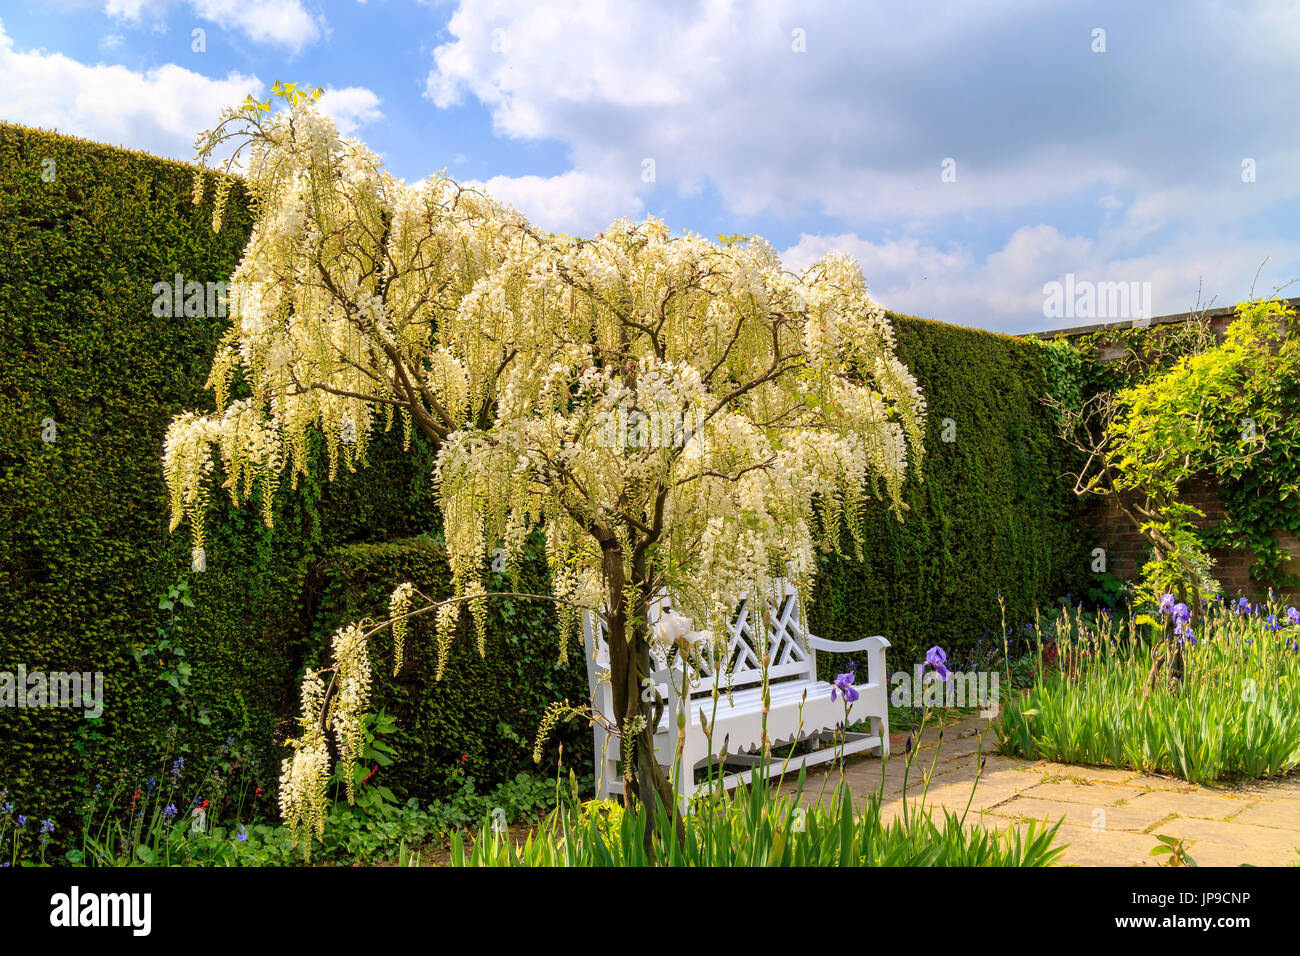 White flowering wisteria Alba entwined climber shrubs, growing as a tree in a garden. Stock Photo